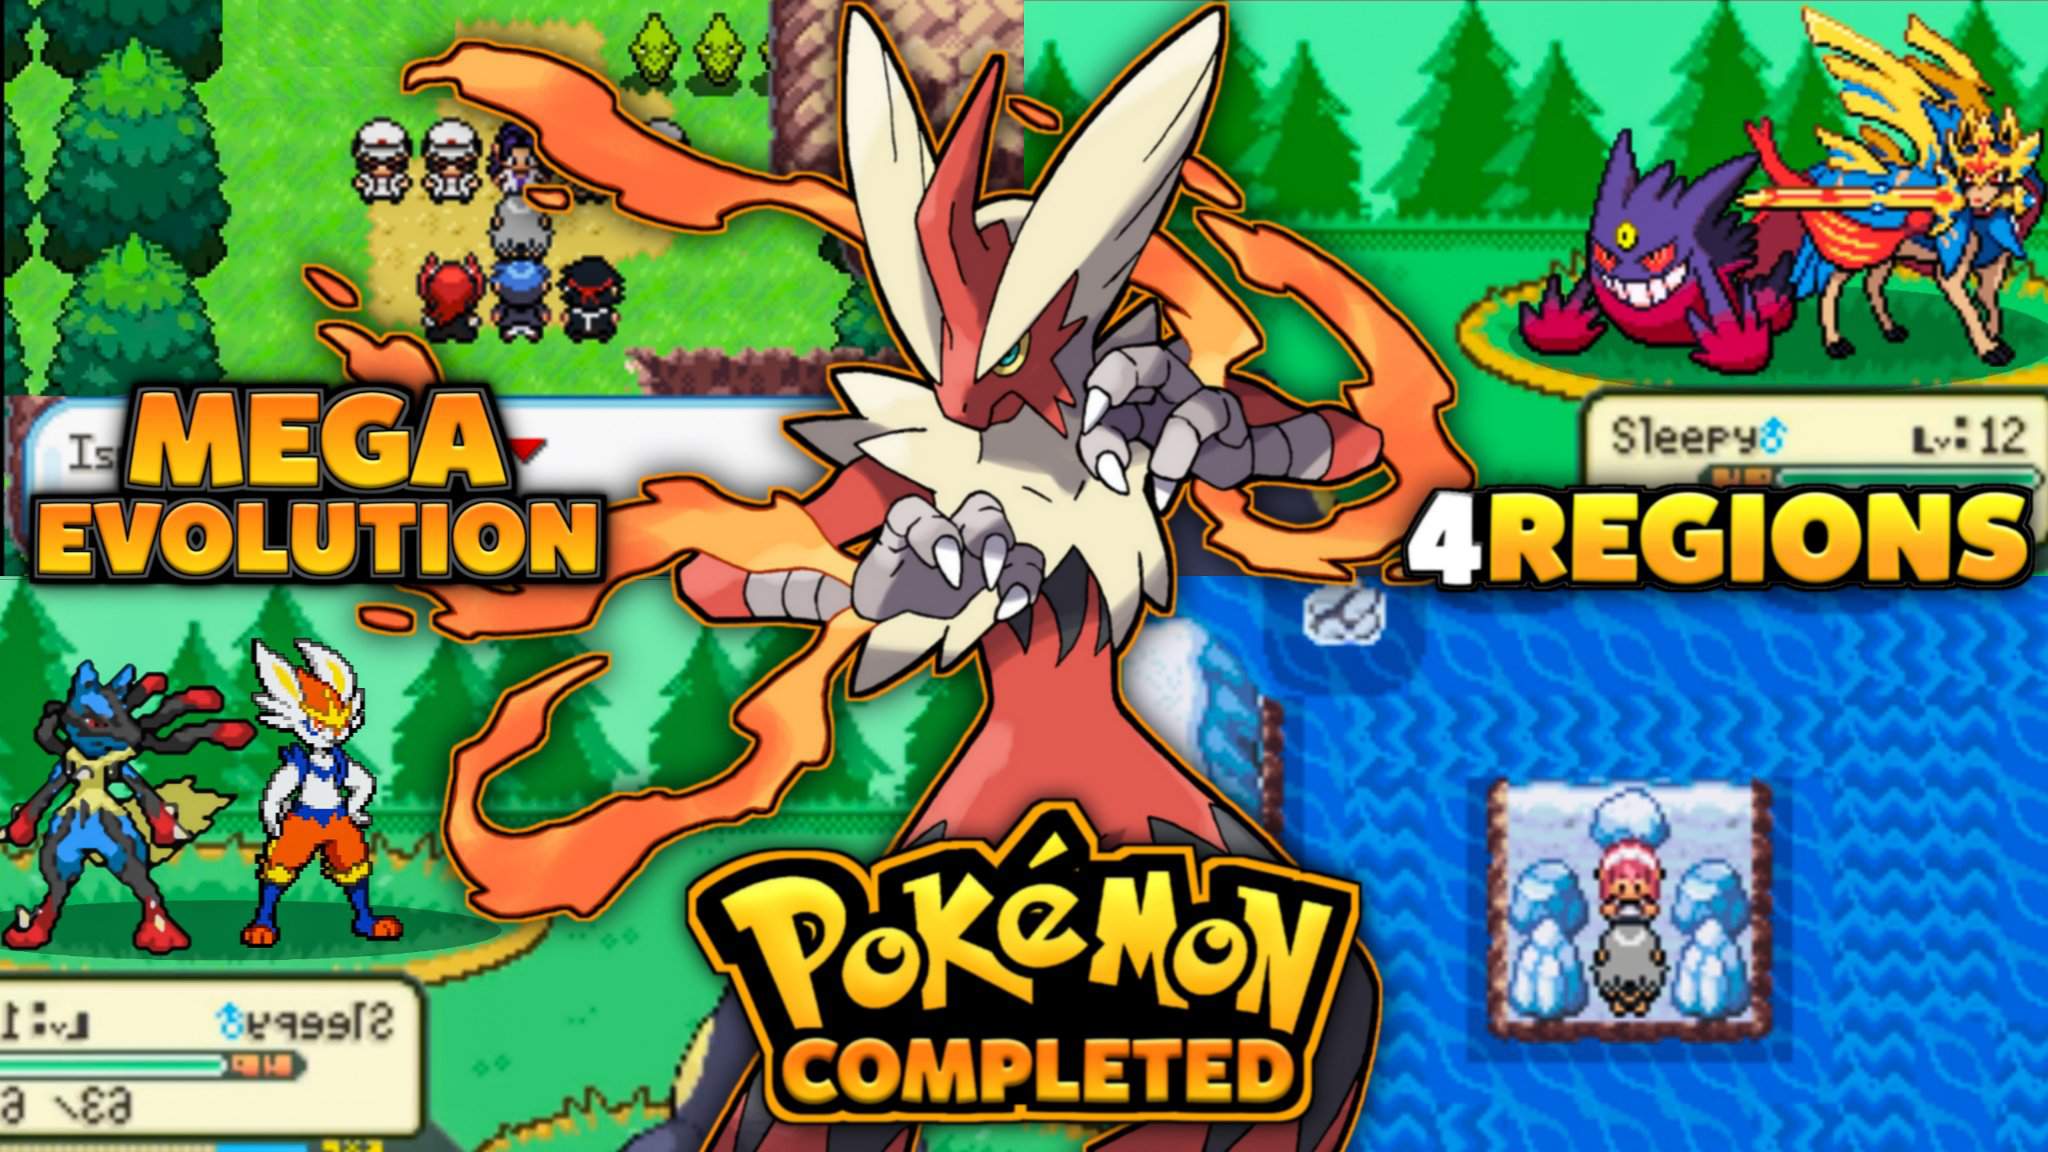 [Updated] Completed Pokemon GBA ROM Hack 2021 With Mega Evolution, 4